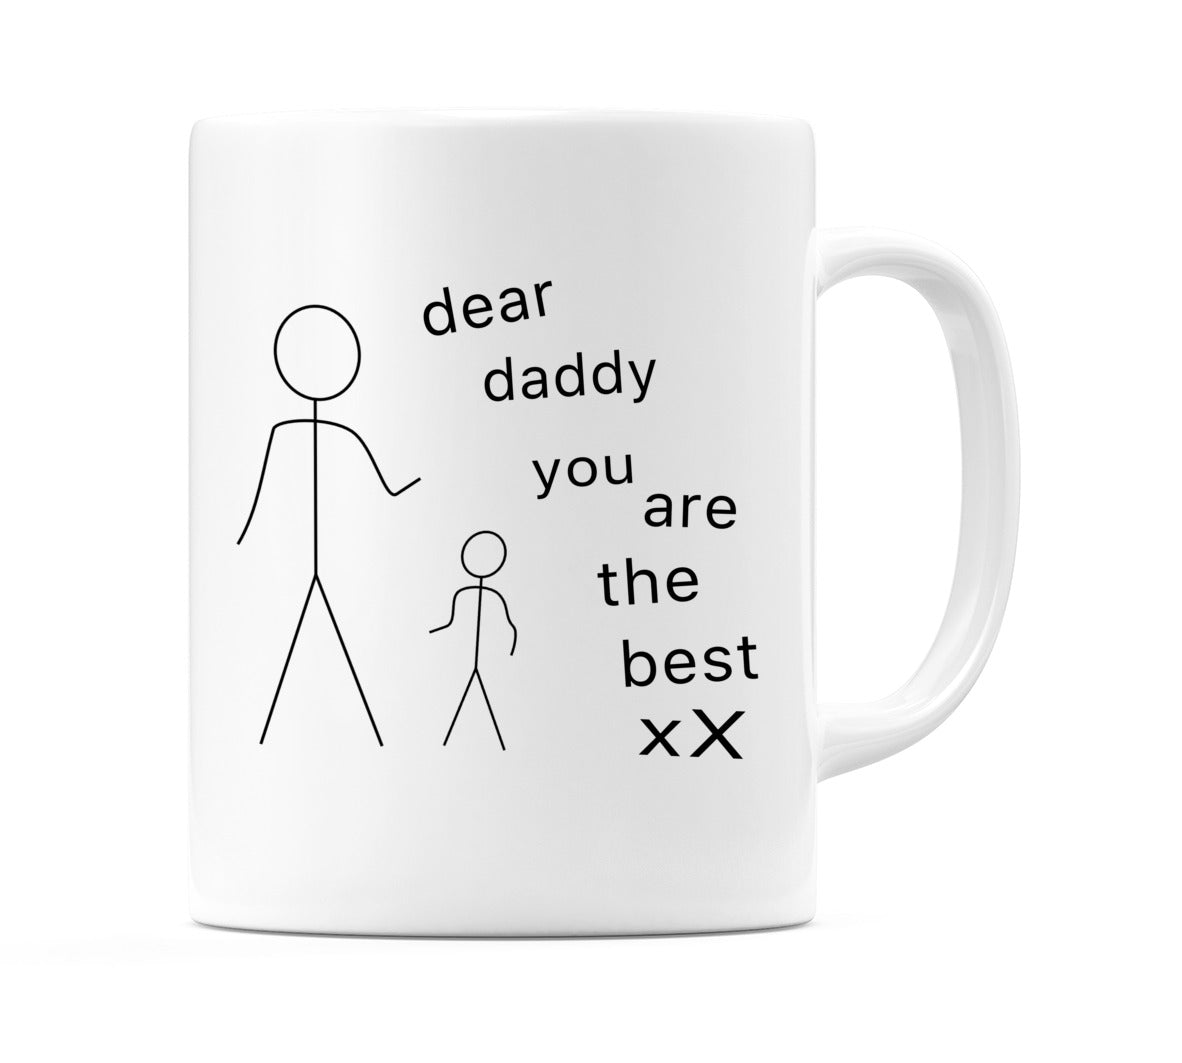 The right side of this mug has a White Coffee Mug With A Stick Figure And A Text That Says Dear Daddy You Are The Best X.